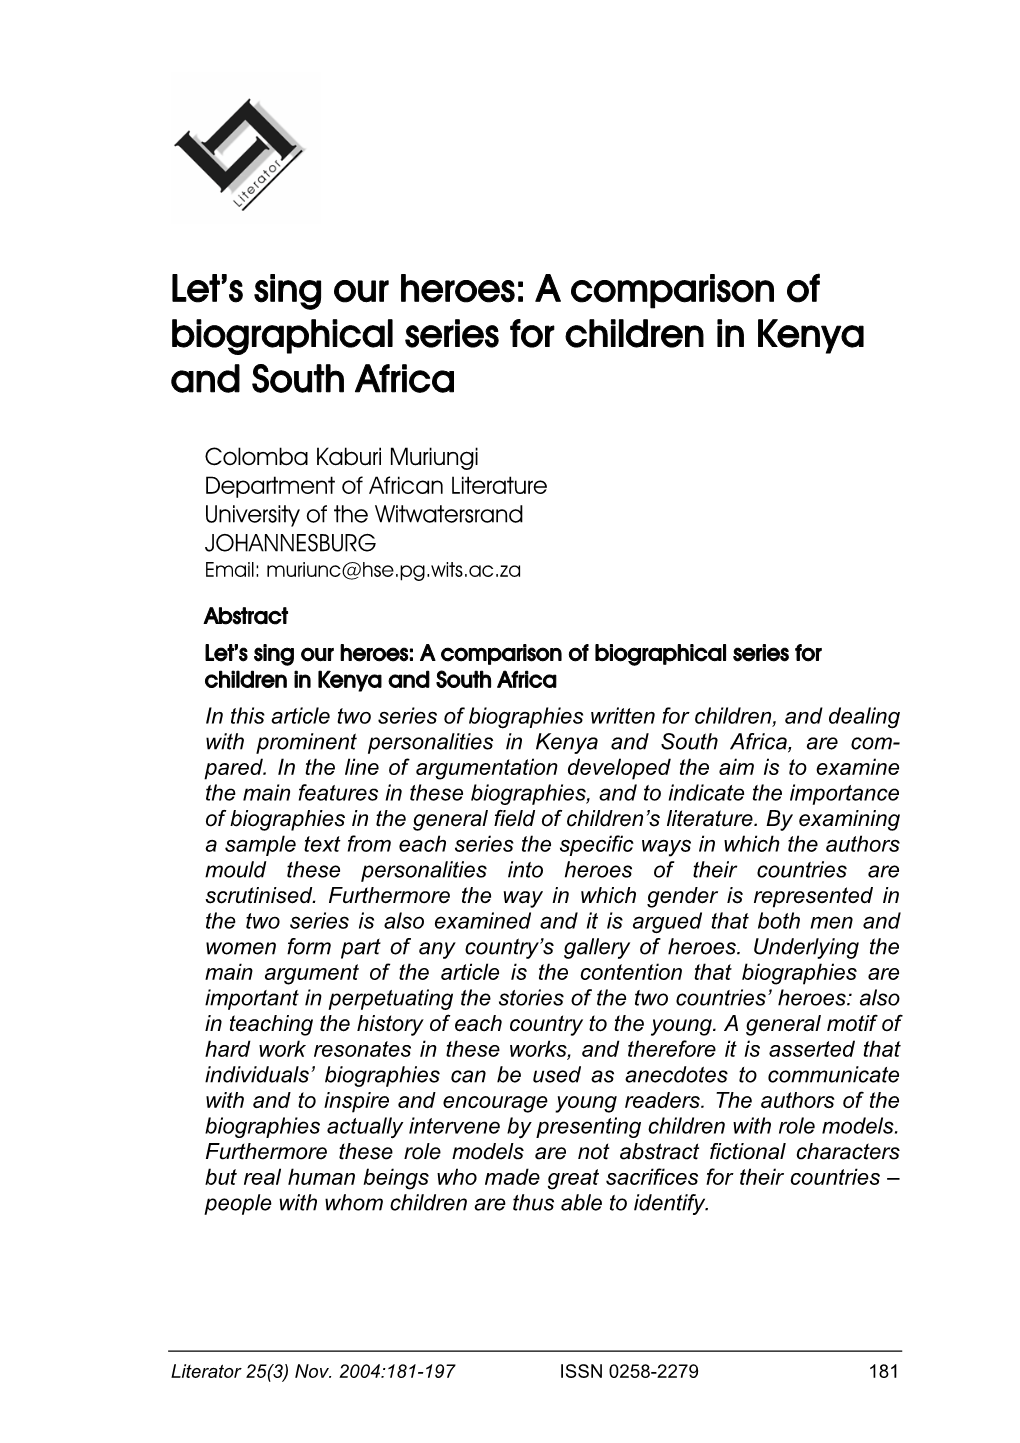 A Comparison of Biographical Series for Children in Kenya and South Africa